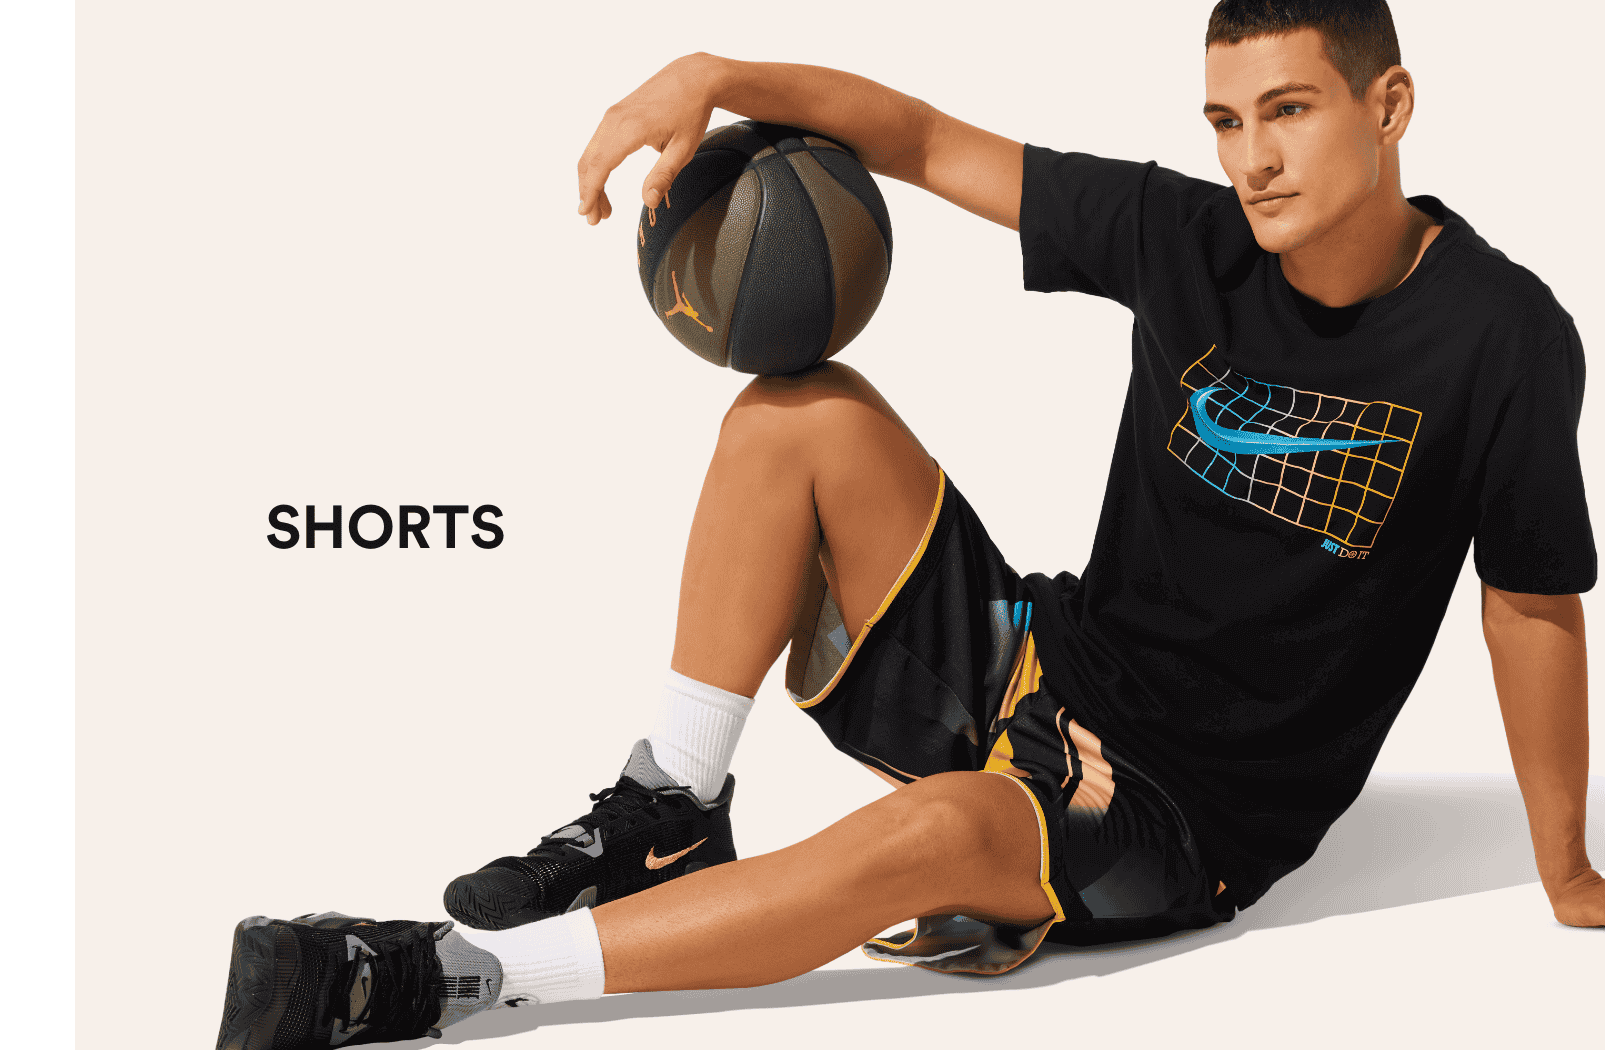 /mens-sportswear-shorts?sort[by]=arrival_date&sort[dir]=desc&page=1&f[current_price][min]=14&f[current_price][max]=129